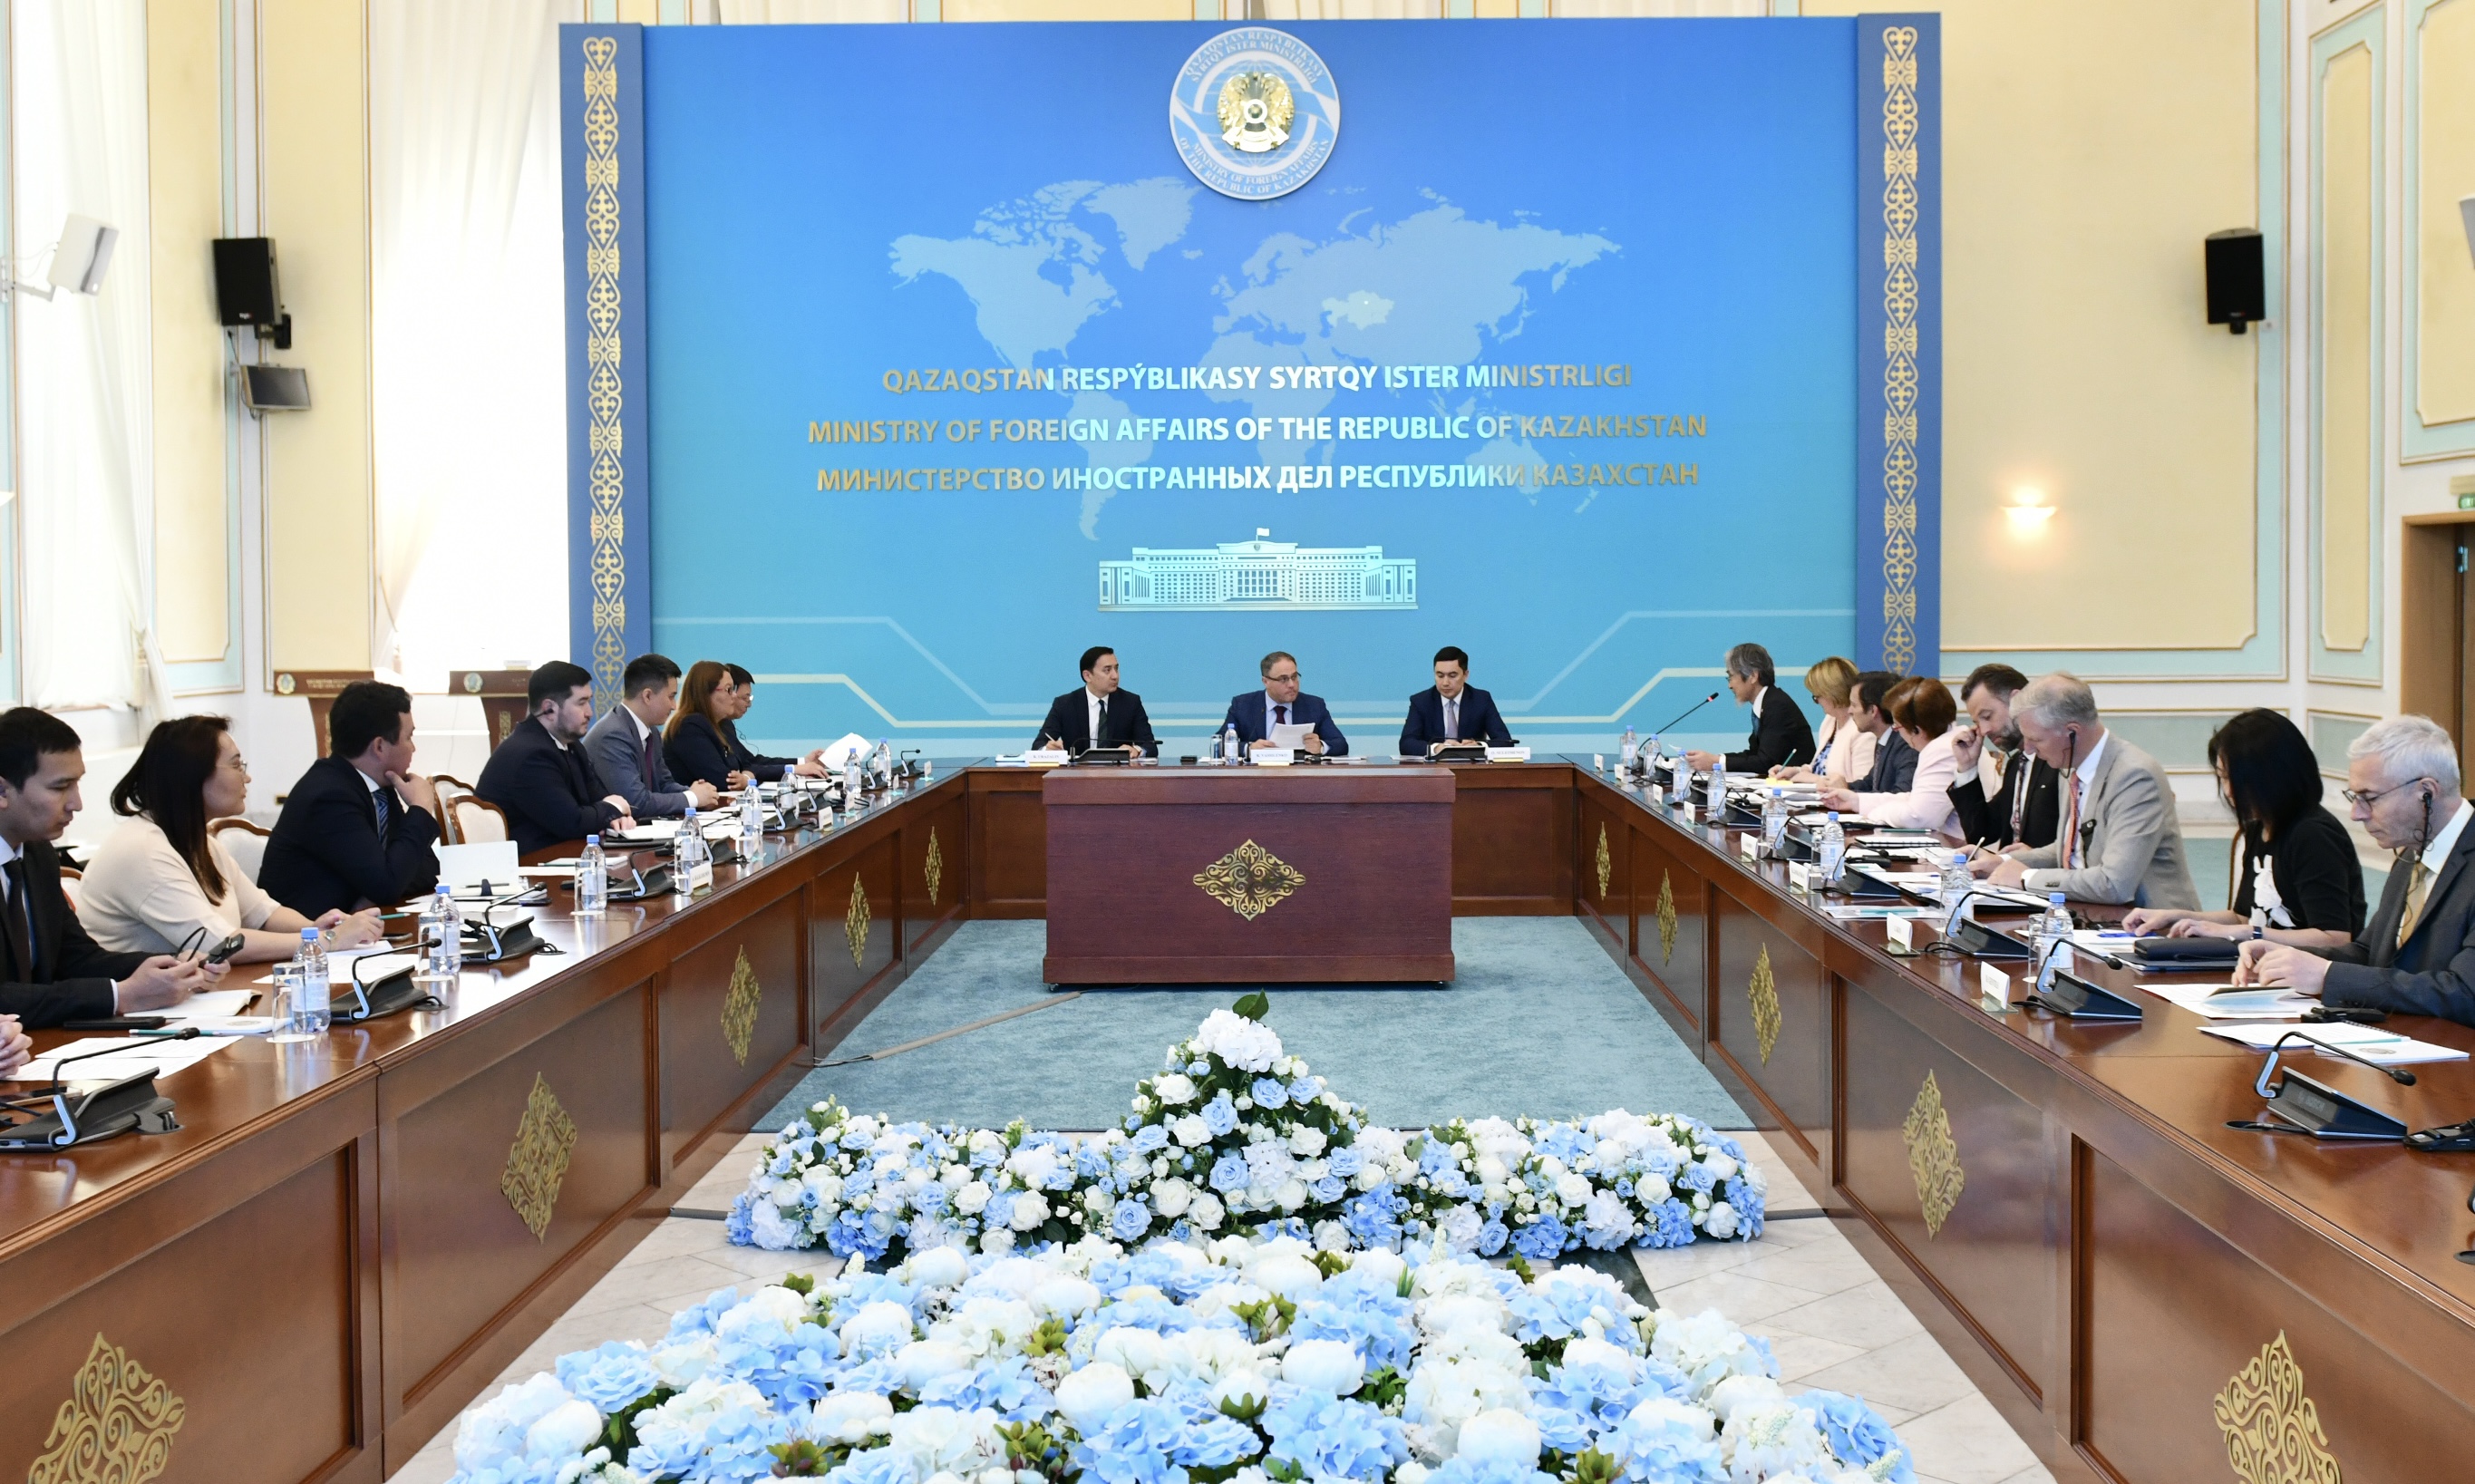 Kazakh Foreign Ministry Hosts Briefing on Results of G7 Summit in Hiroshima